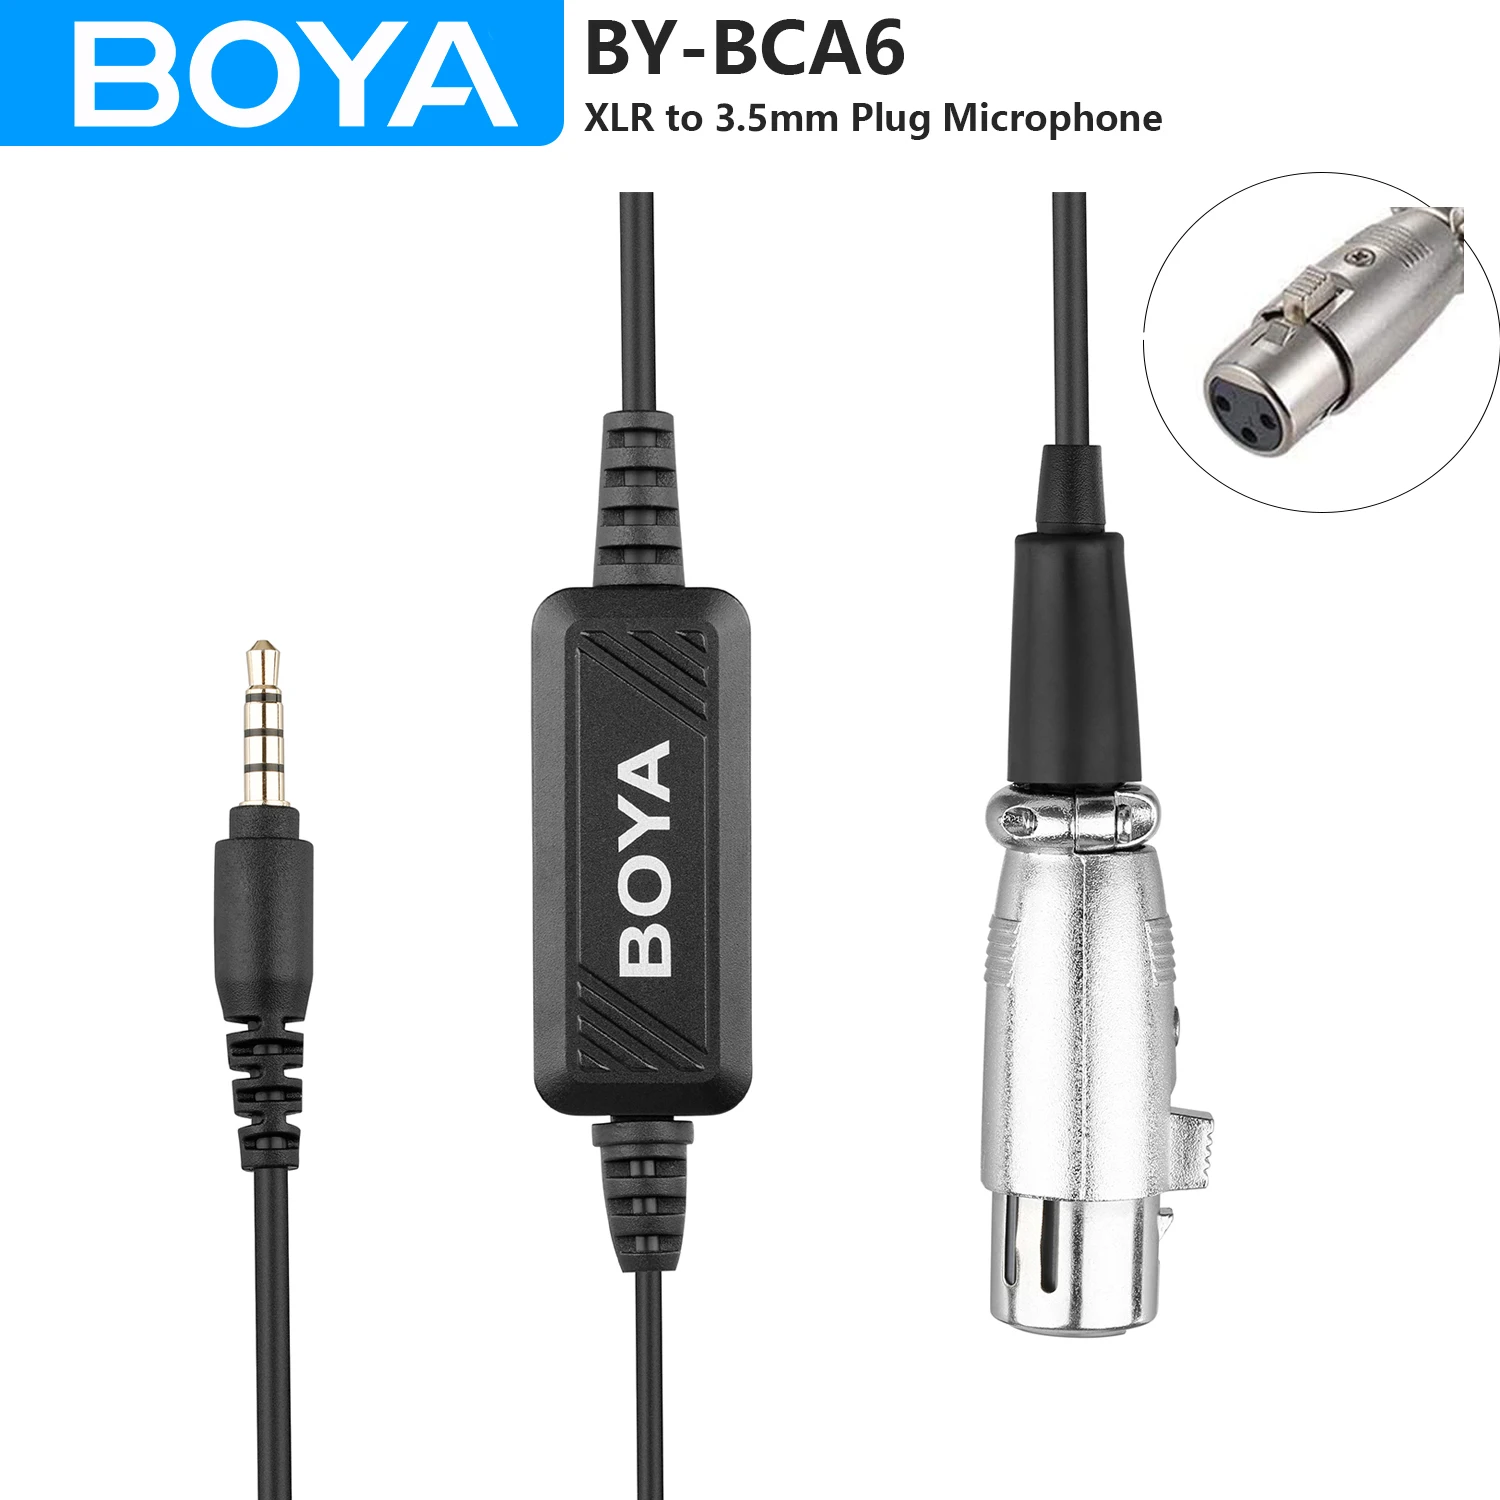 

BOYA BY-BCA6 XLR Female to 3.5mm TRRS Connector Adjustable Volume Microphone Cable Adapter for iPhone Android PC Mobile Devices